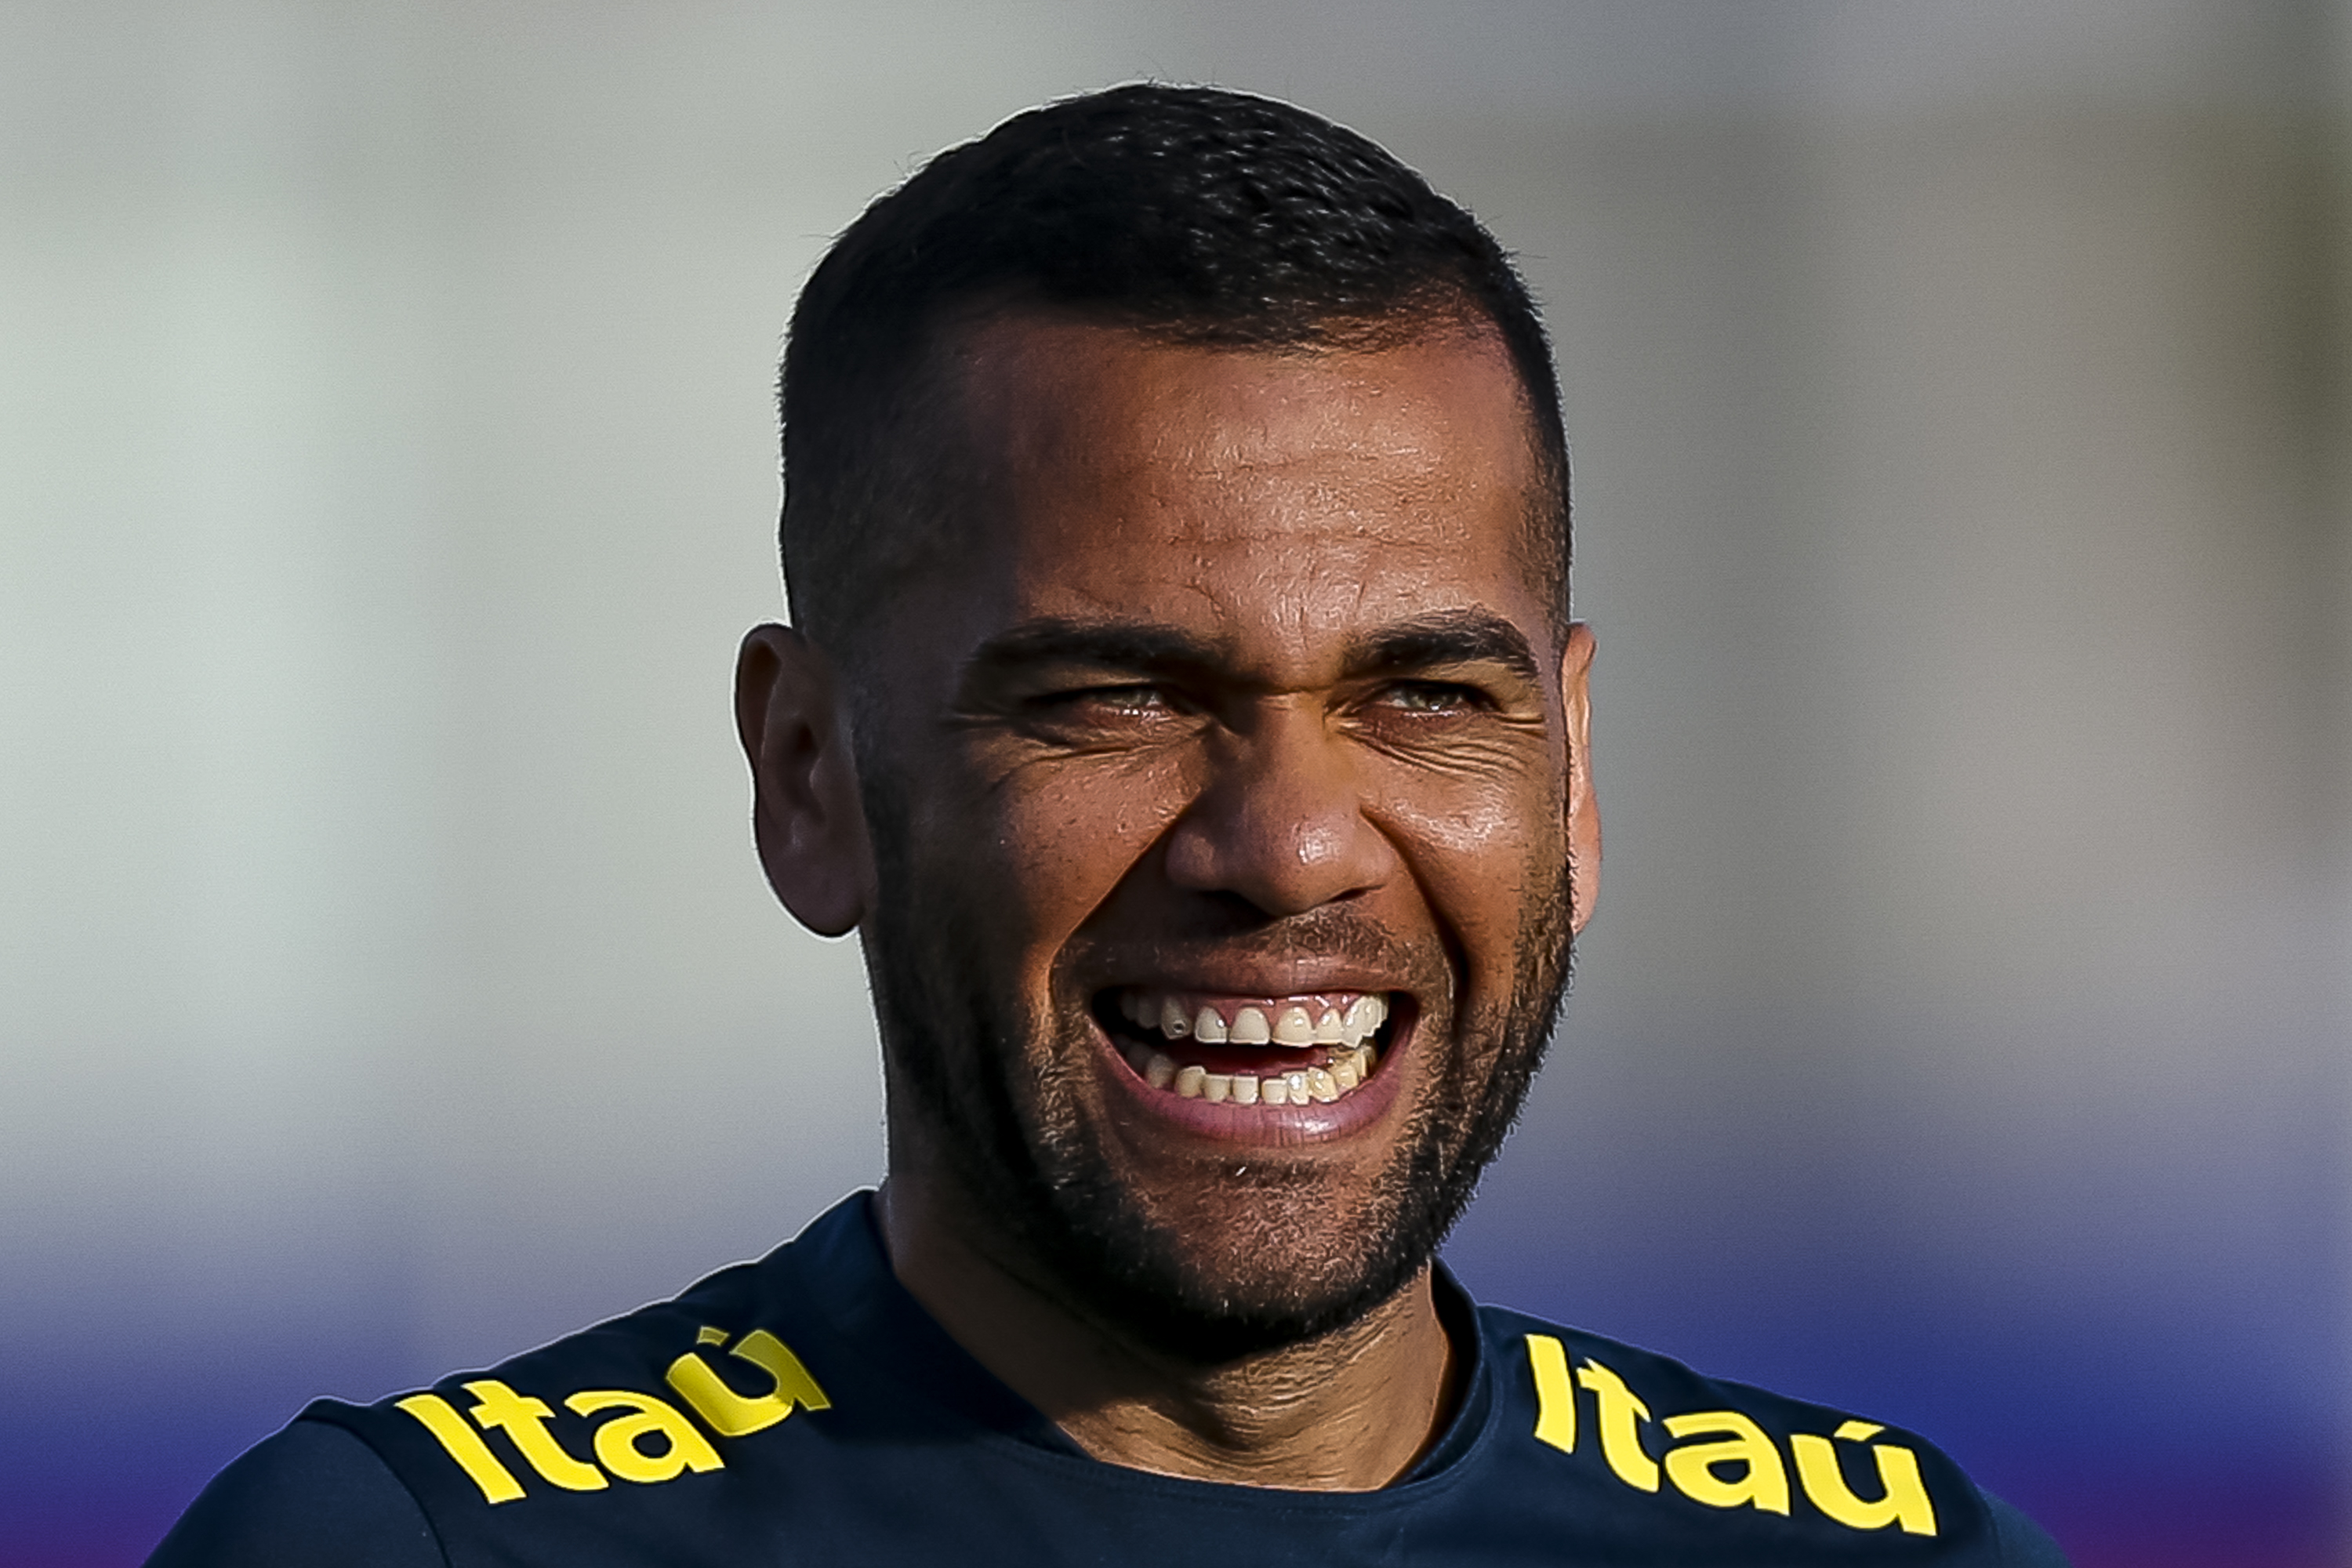 Dani Alves has withdrawn from the Brazil squad with an injury (Photo by Buda Mendes/Getty Images)